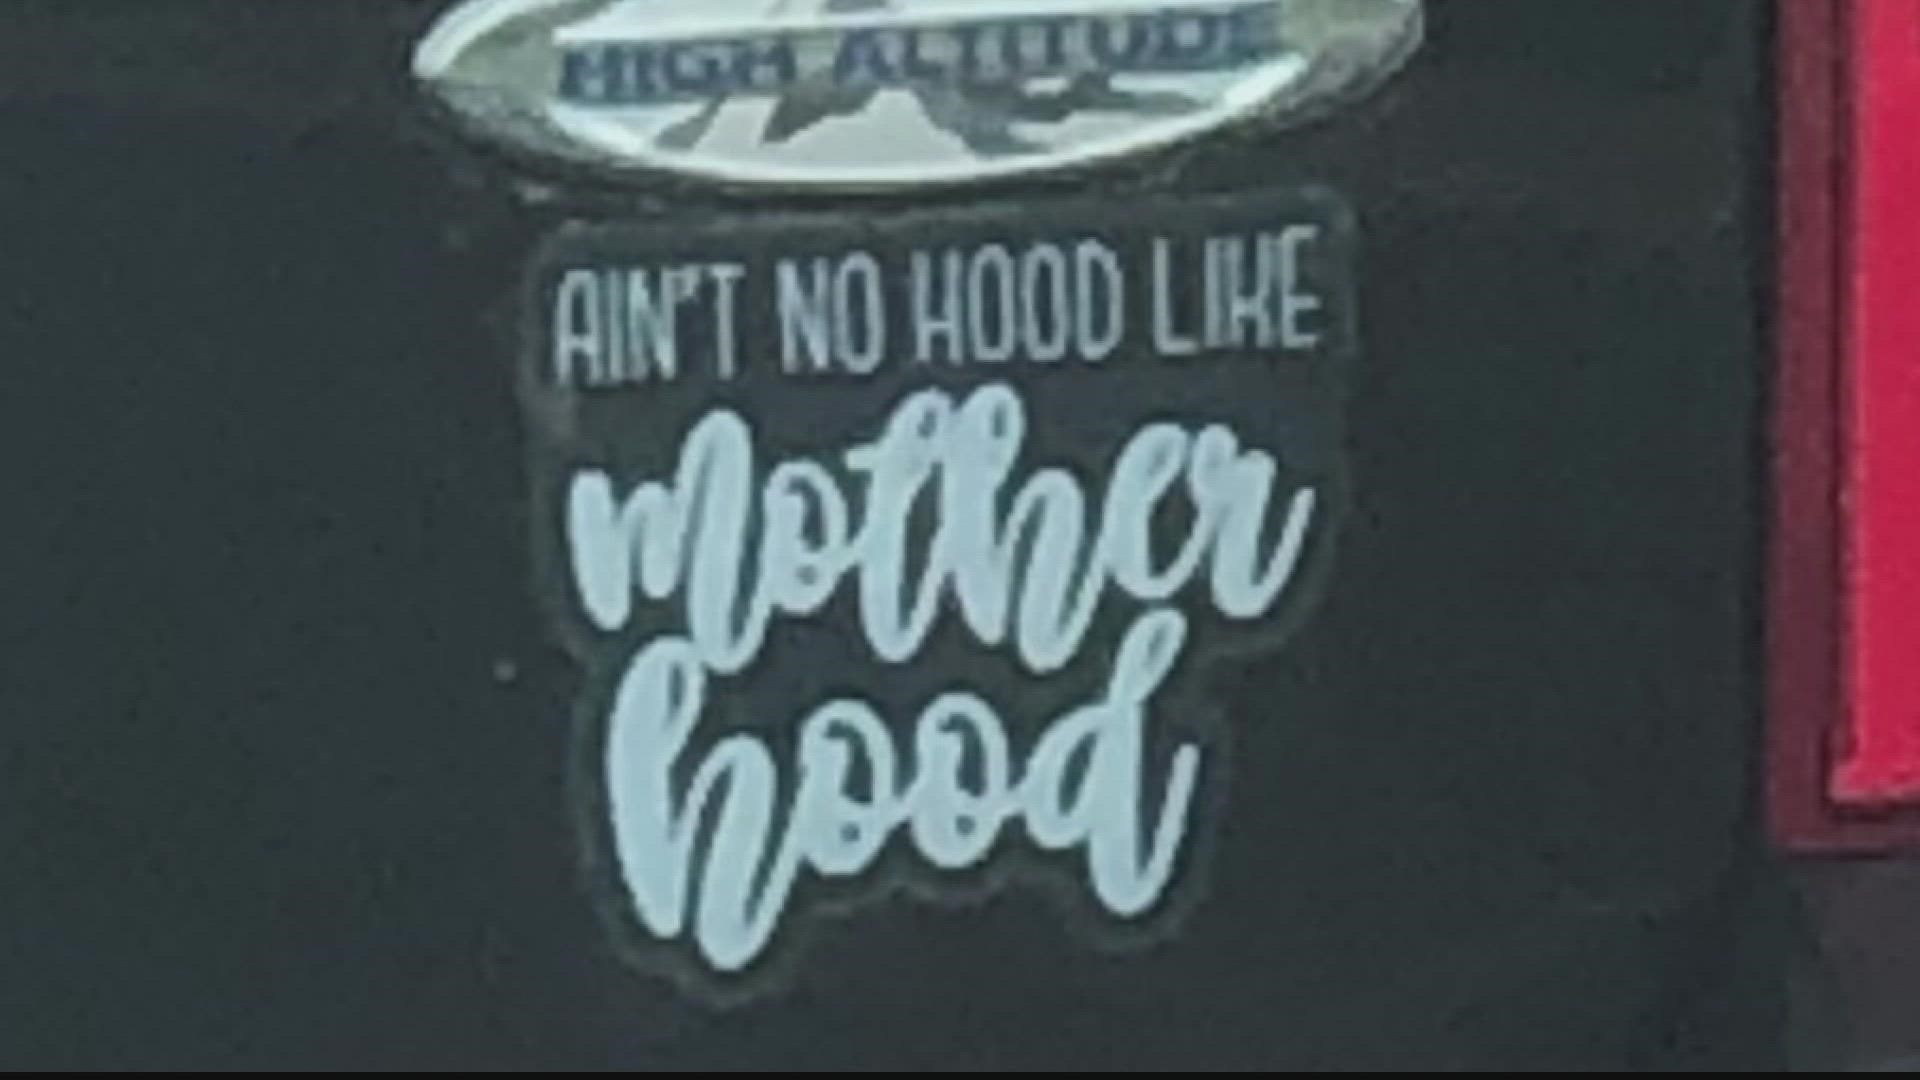 A person sends in a photo showing a bumper sticker that says "Ain't no hood like motherhood."